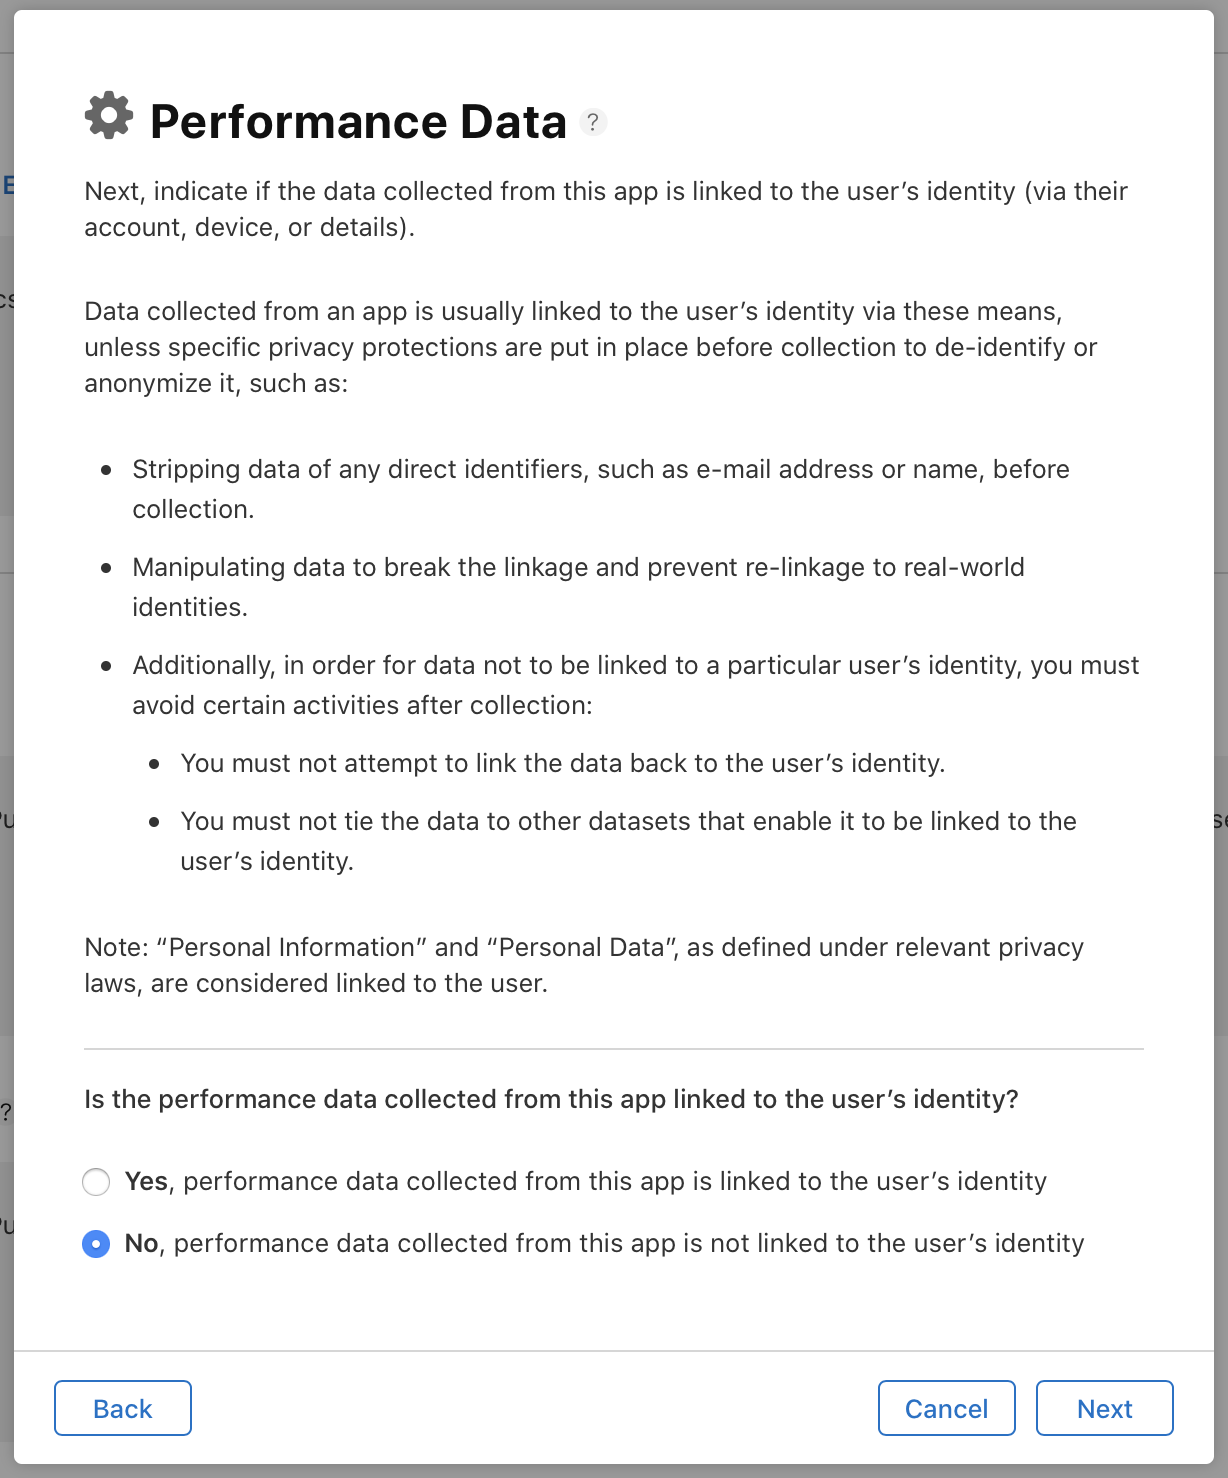 e-_performance_data-17.png